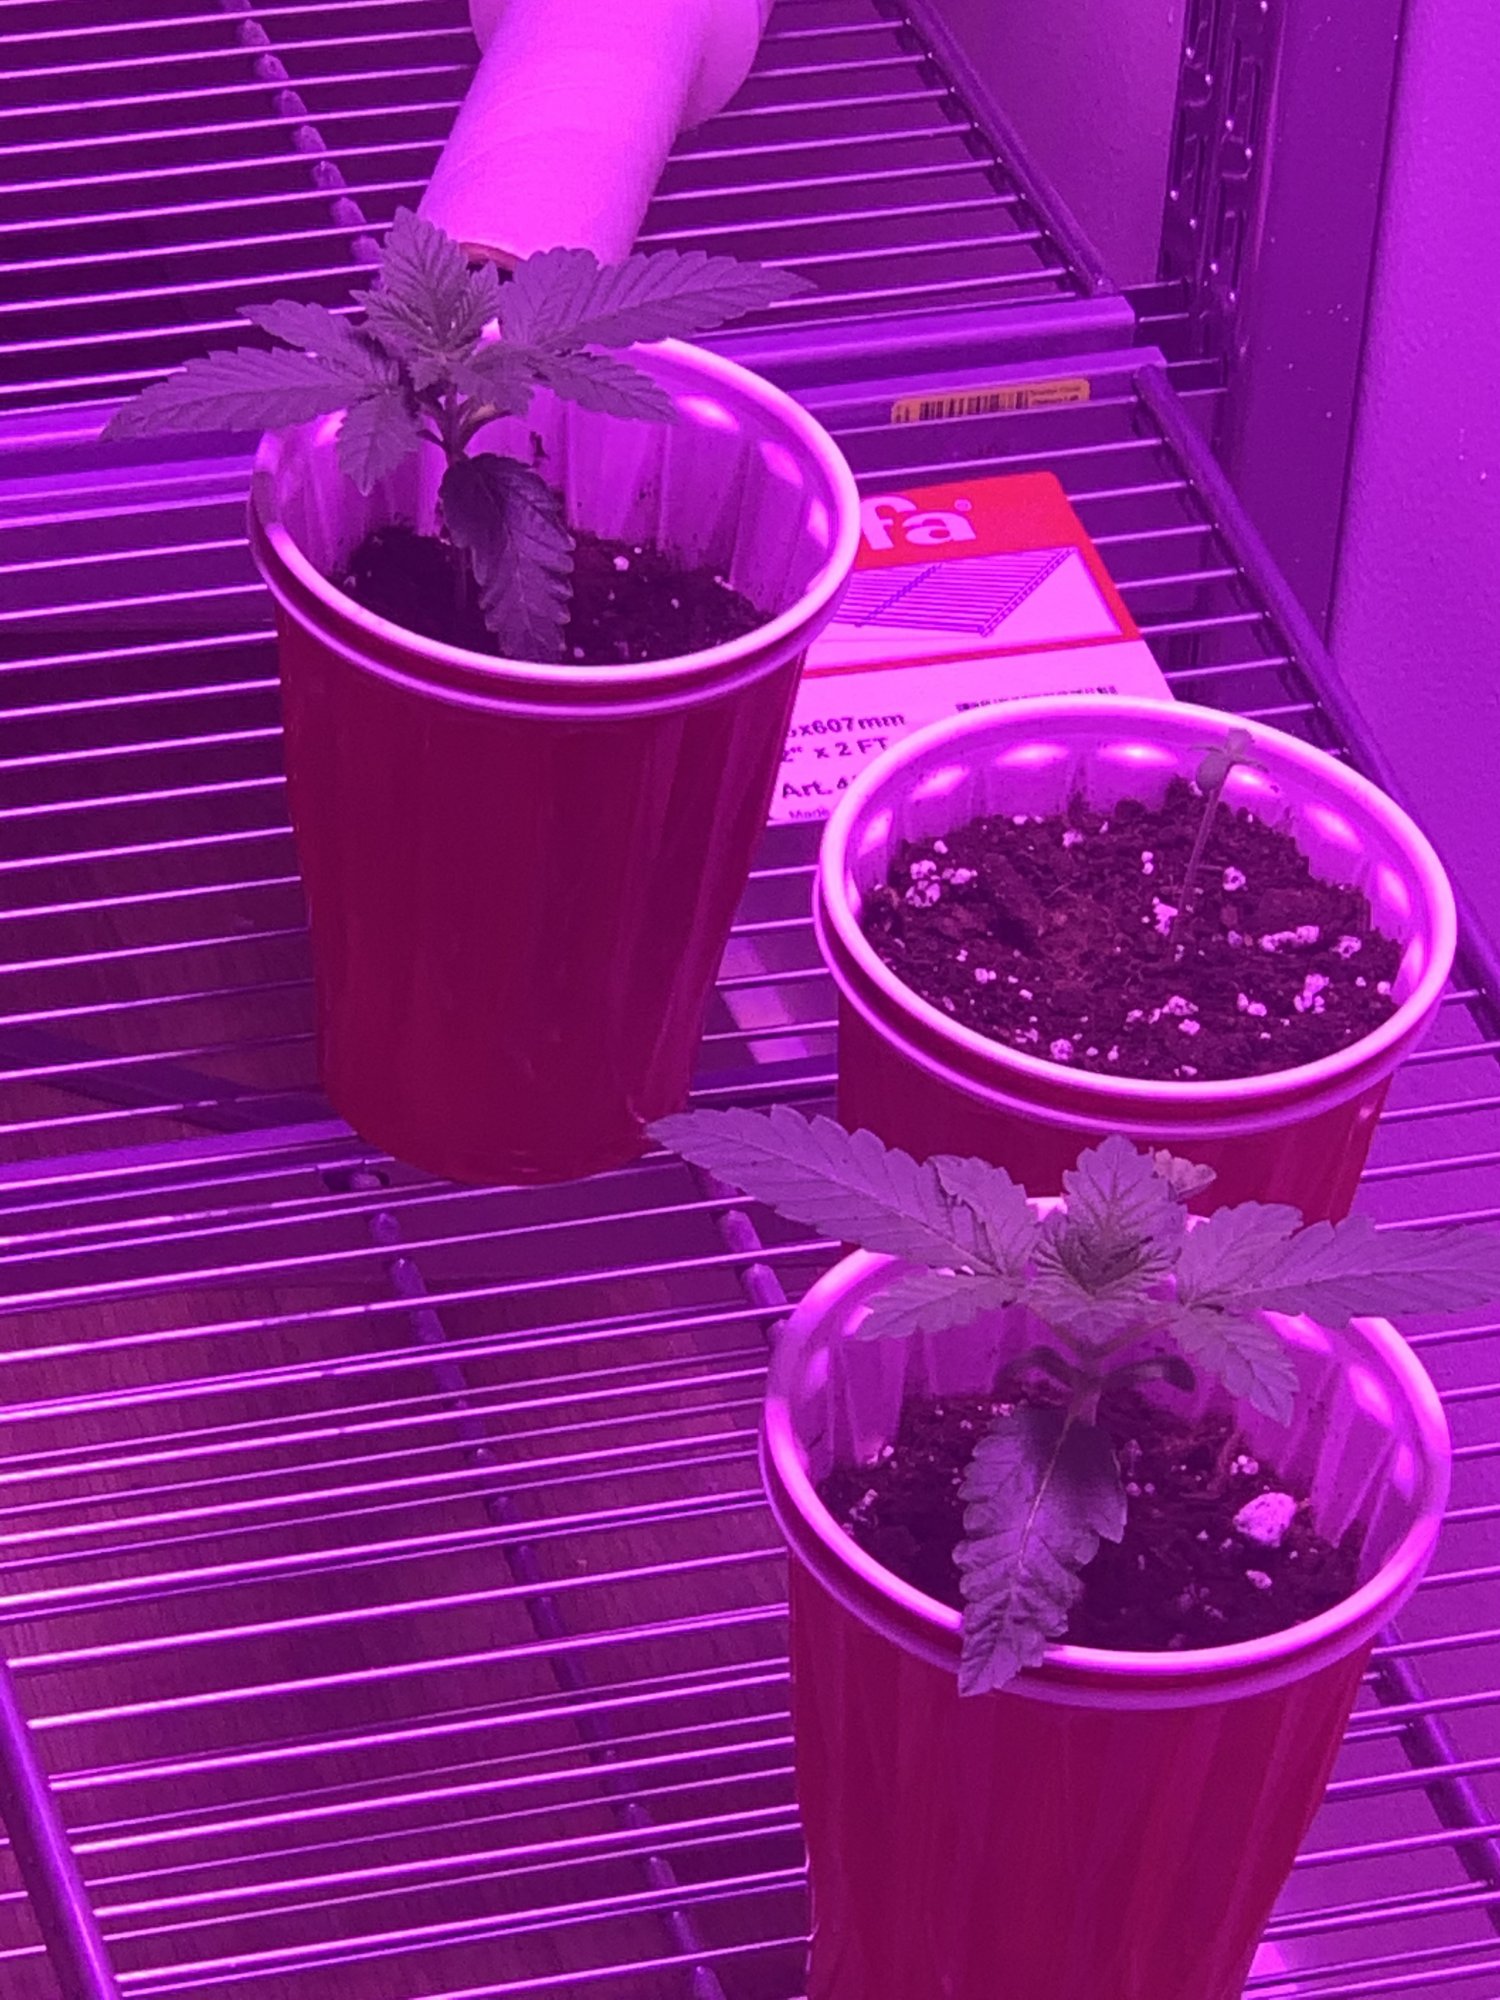 Do the girls look ready for their first transplant